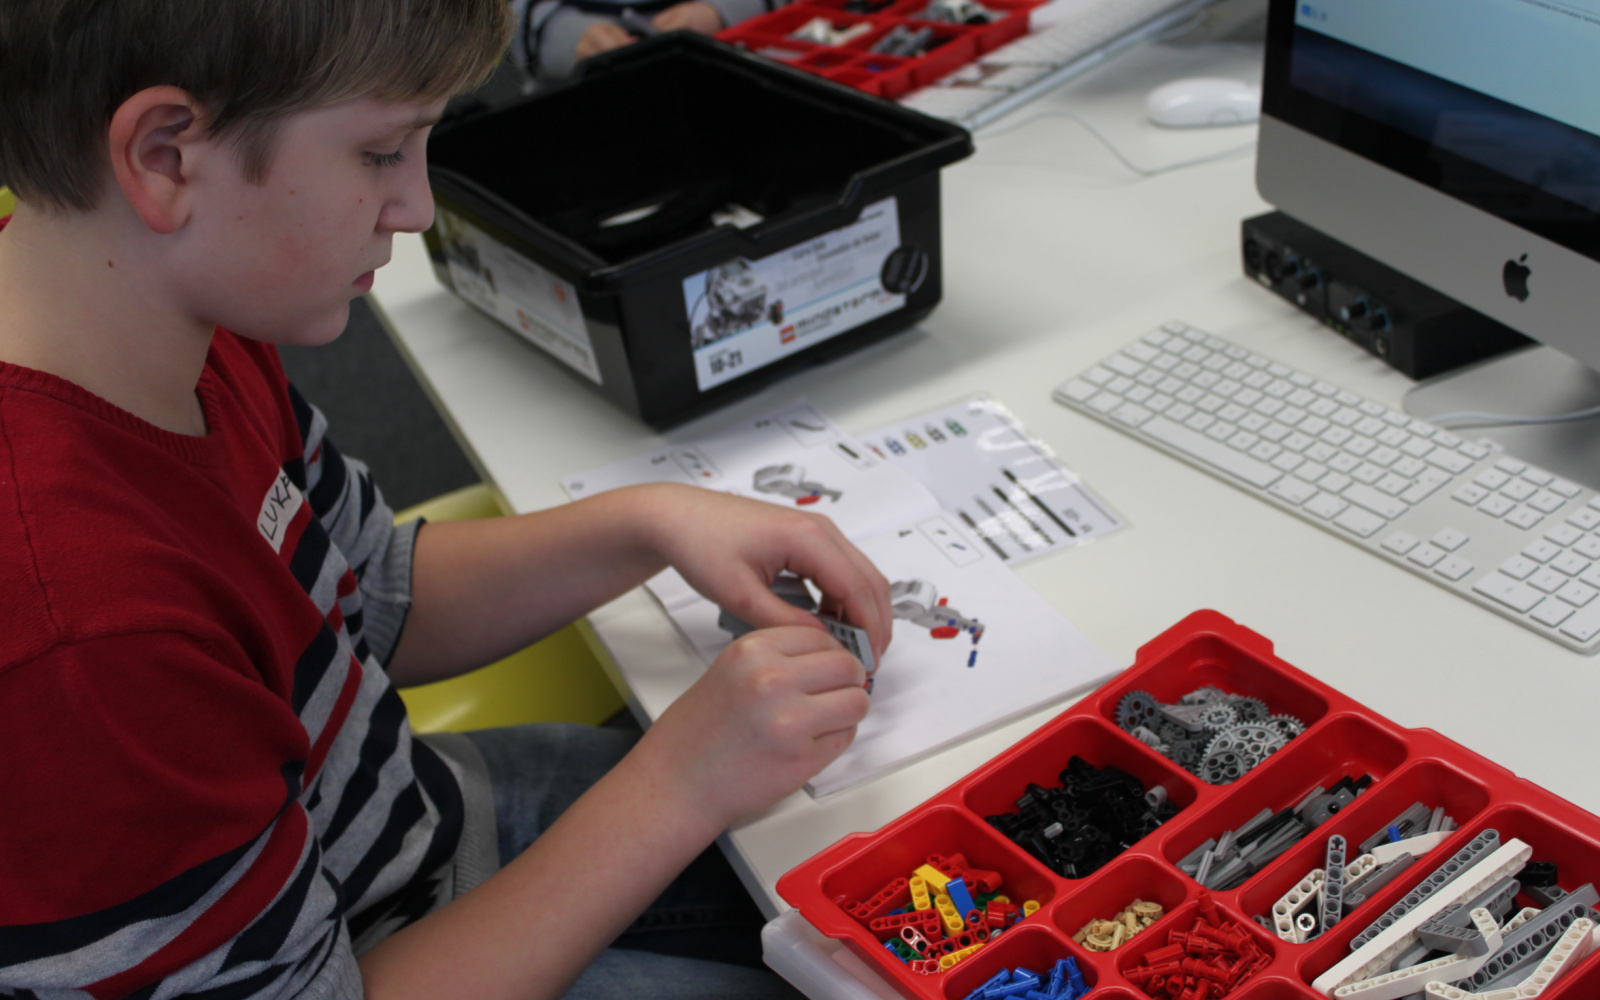 A boy is constructing a lego-robot. On the table he is sitting at are boxes filled with robot parts.